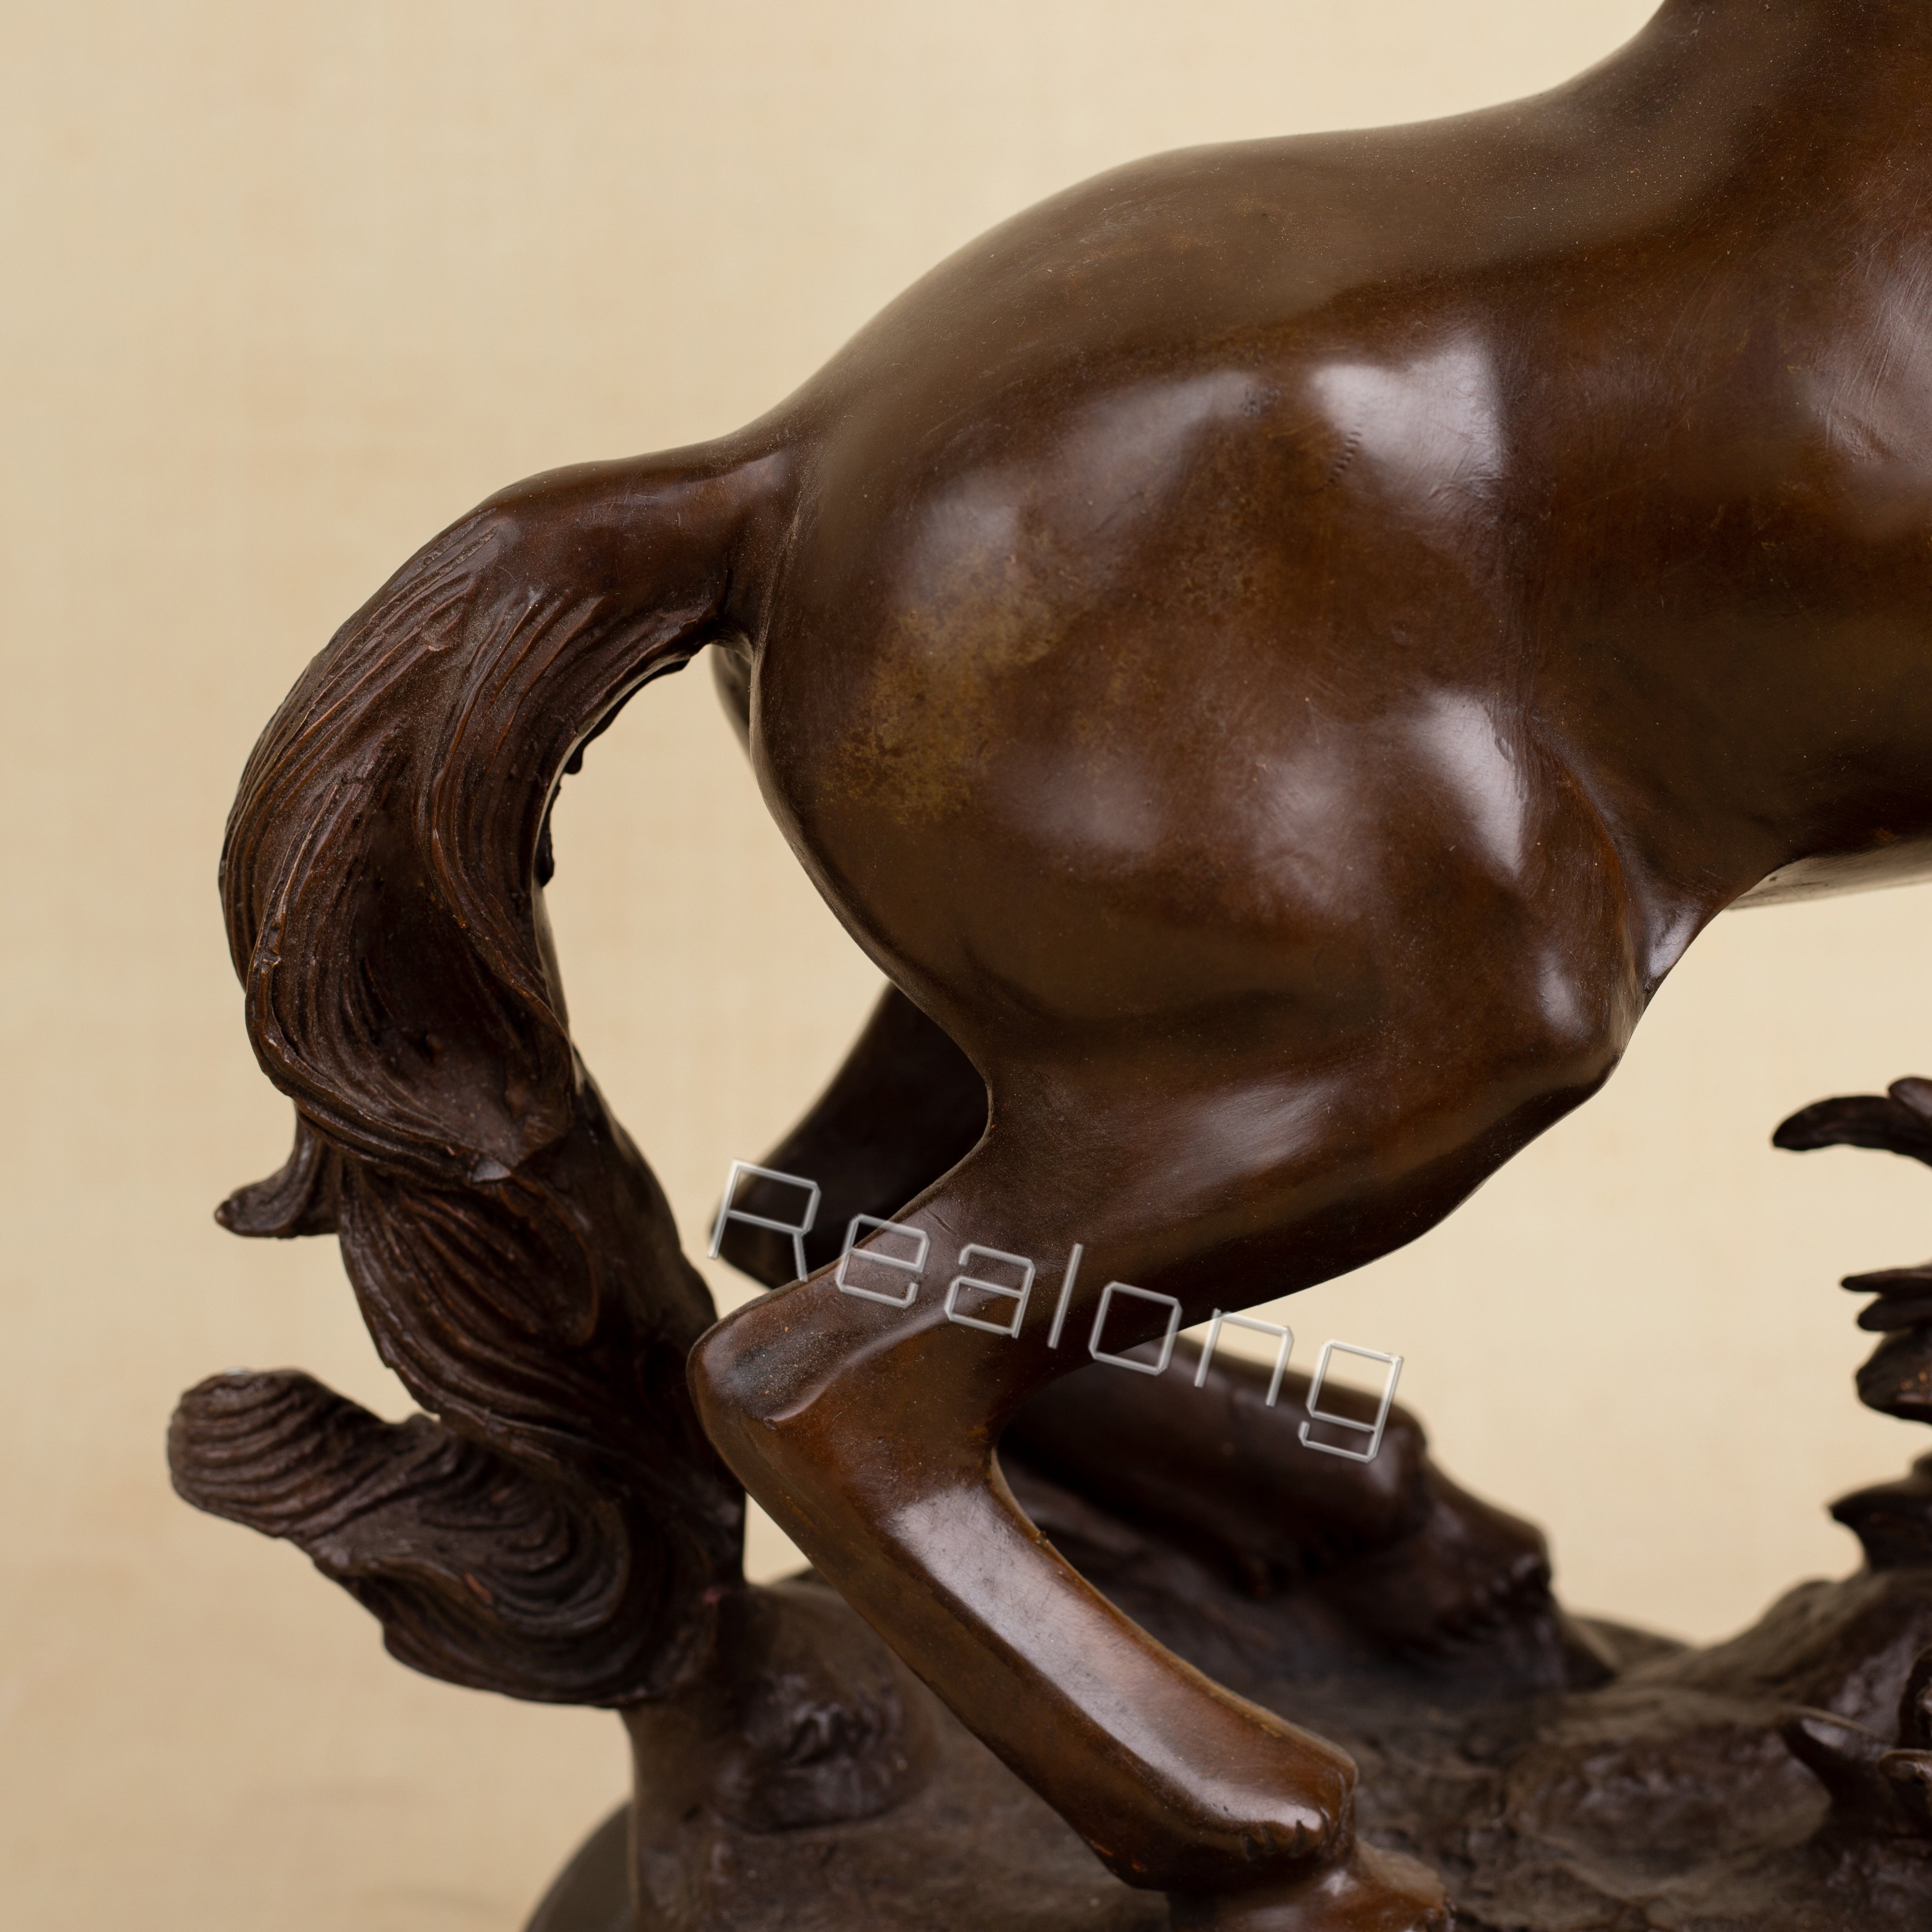 49cm Bronze Horse Statue Modern Art Bronze Horse Sculpture Animal Bronze Crafts With Marble Base For Home Decor Ornament Gifts